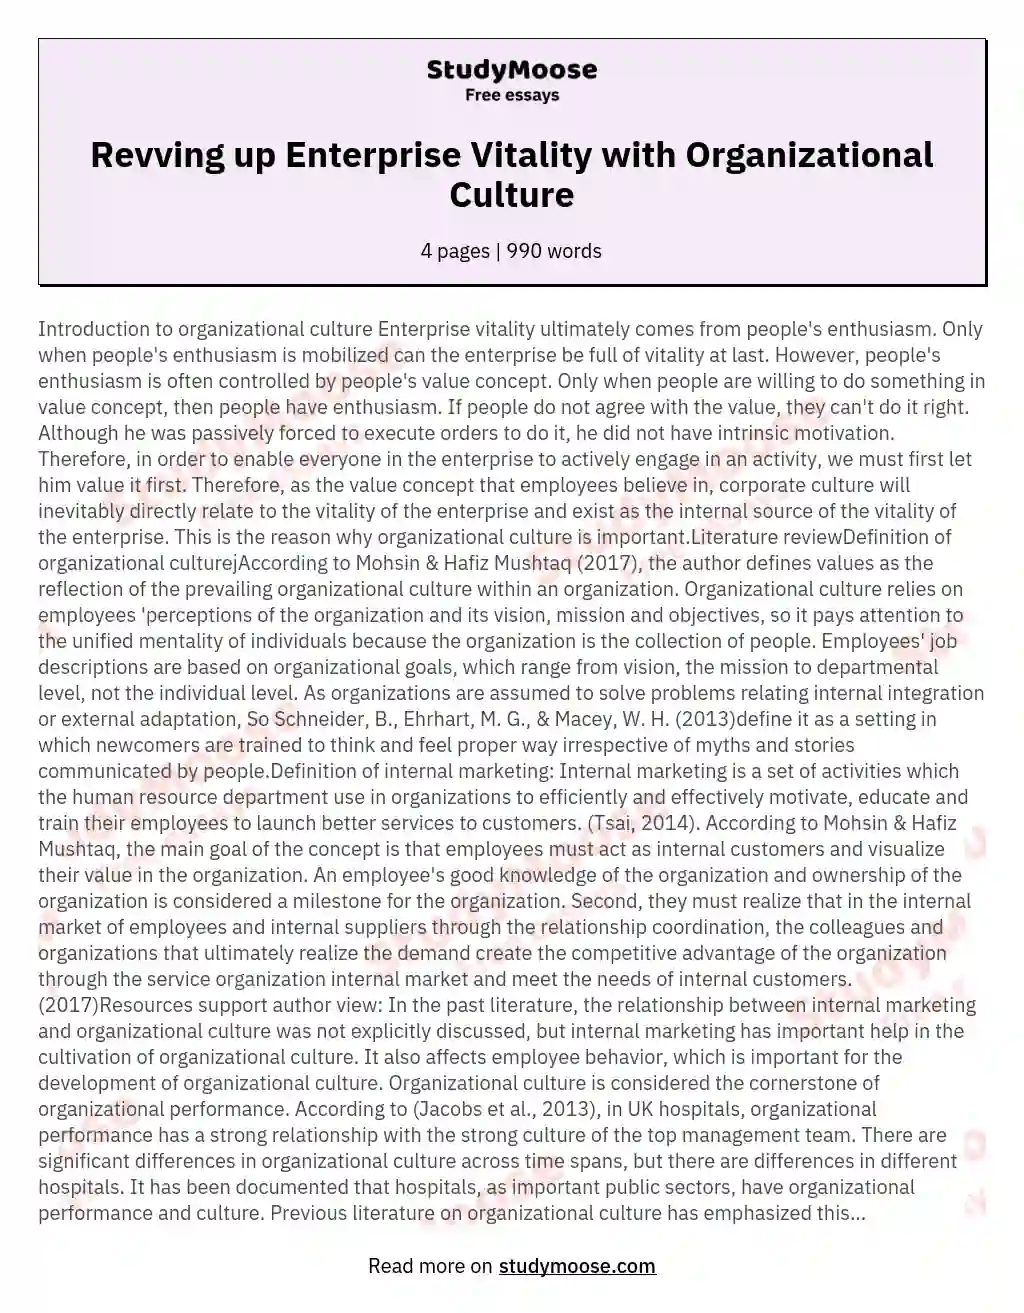 Revving up Enterprise Vitality with Organizational Culture essay